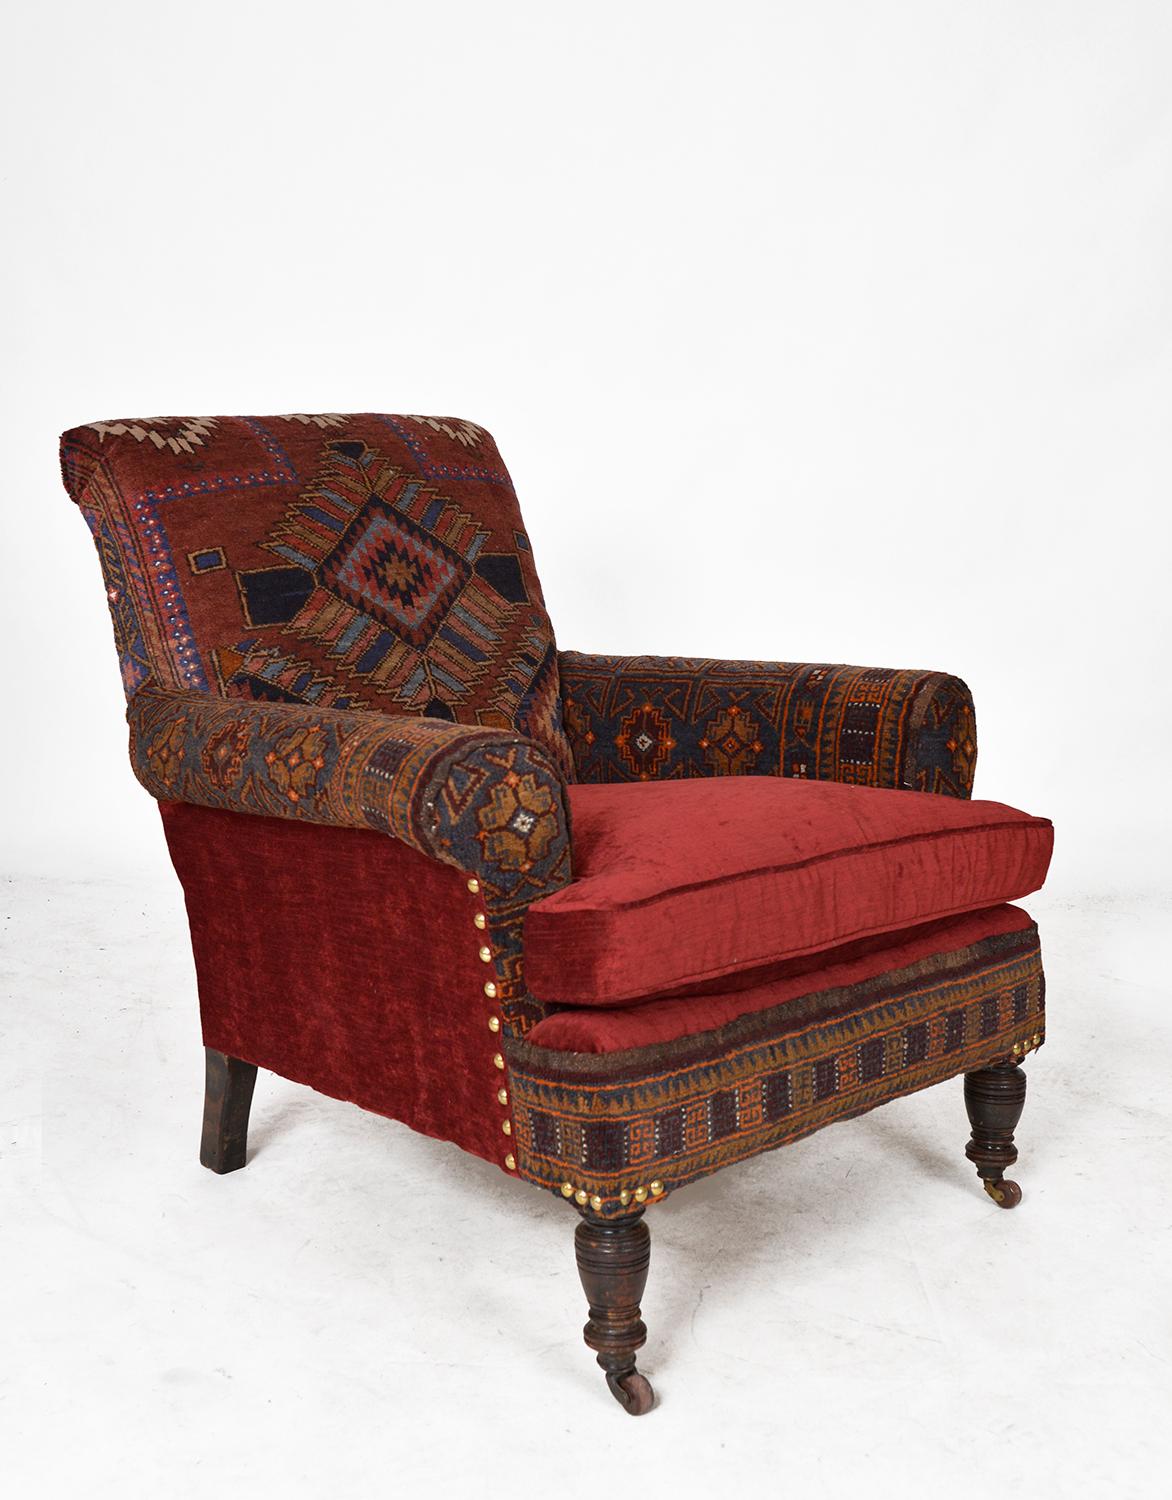 A sumptuous antique ‘Baluch’ carpet chair sat on front castors, covered in garnet coloured velvet with matching feather filled cushion. Professionally upholstered in two antique Baluch rugs; one with a multi-coloured geometric pattern on the back